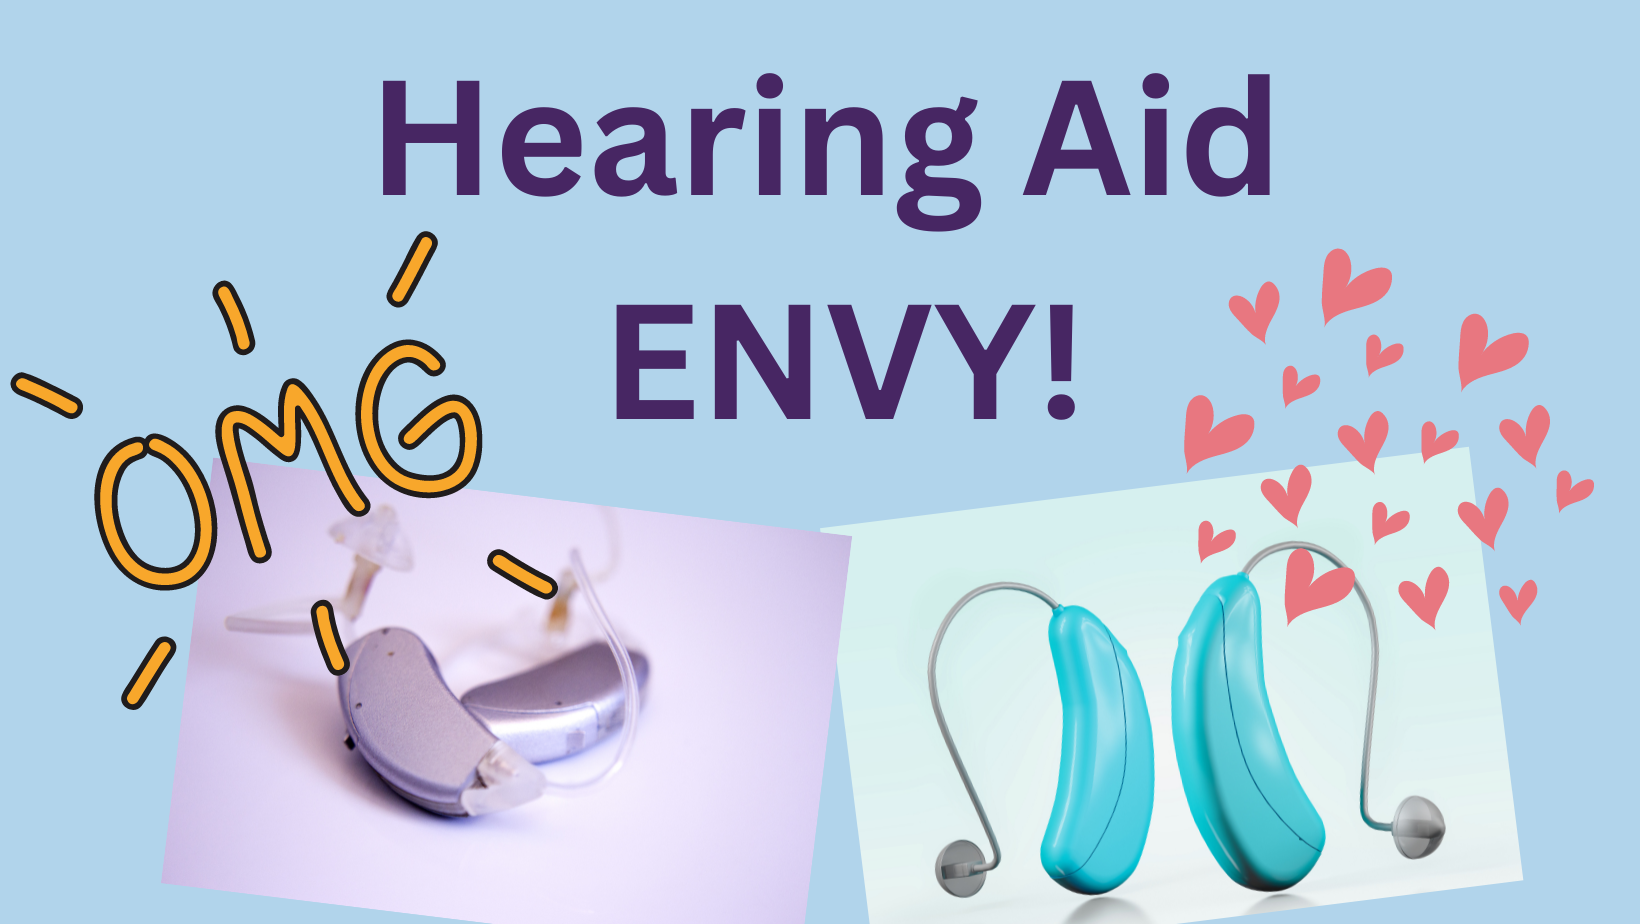 Featured image for “Hearing Aid Envy!”